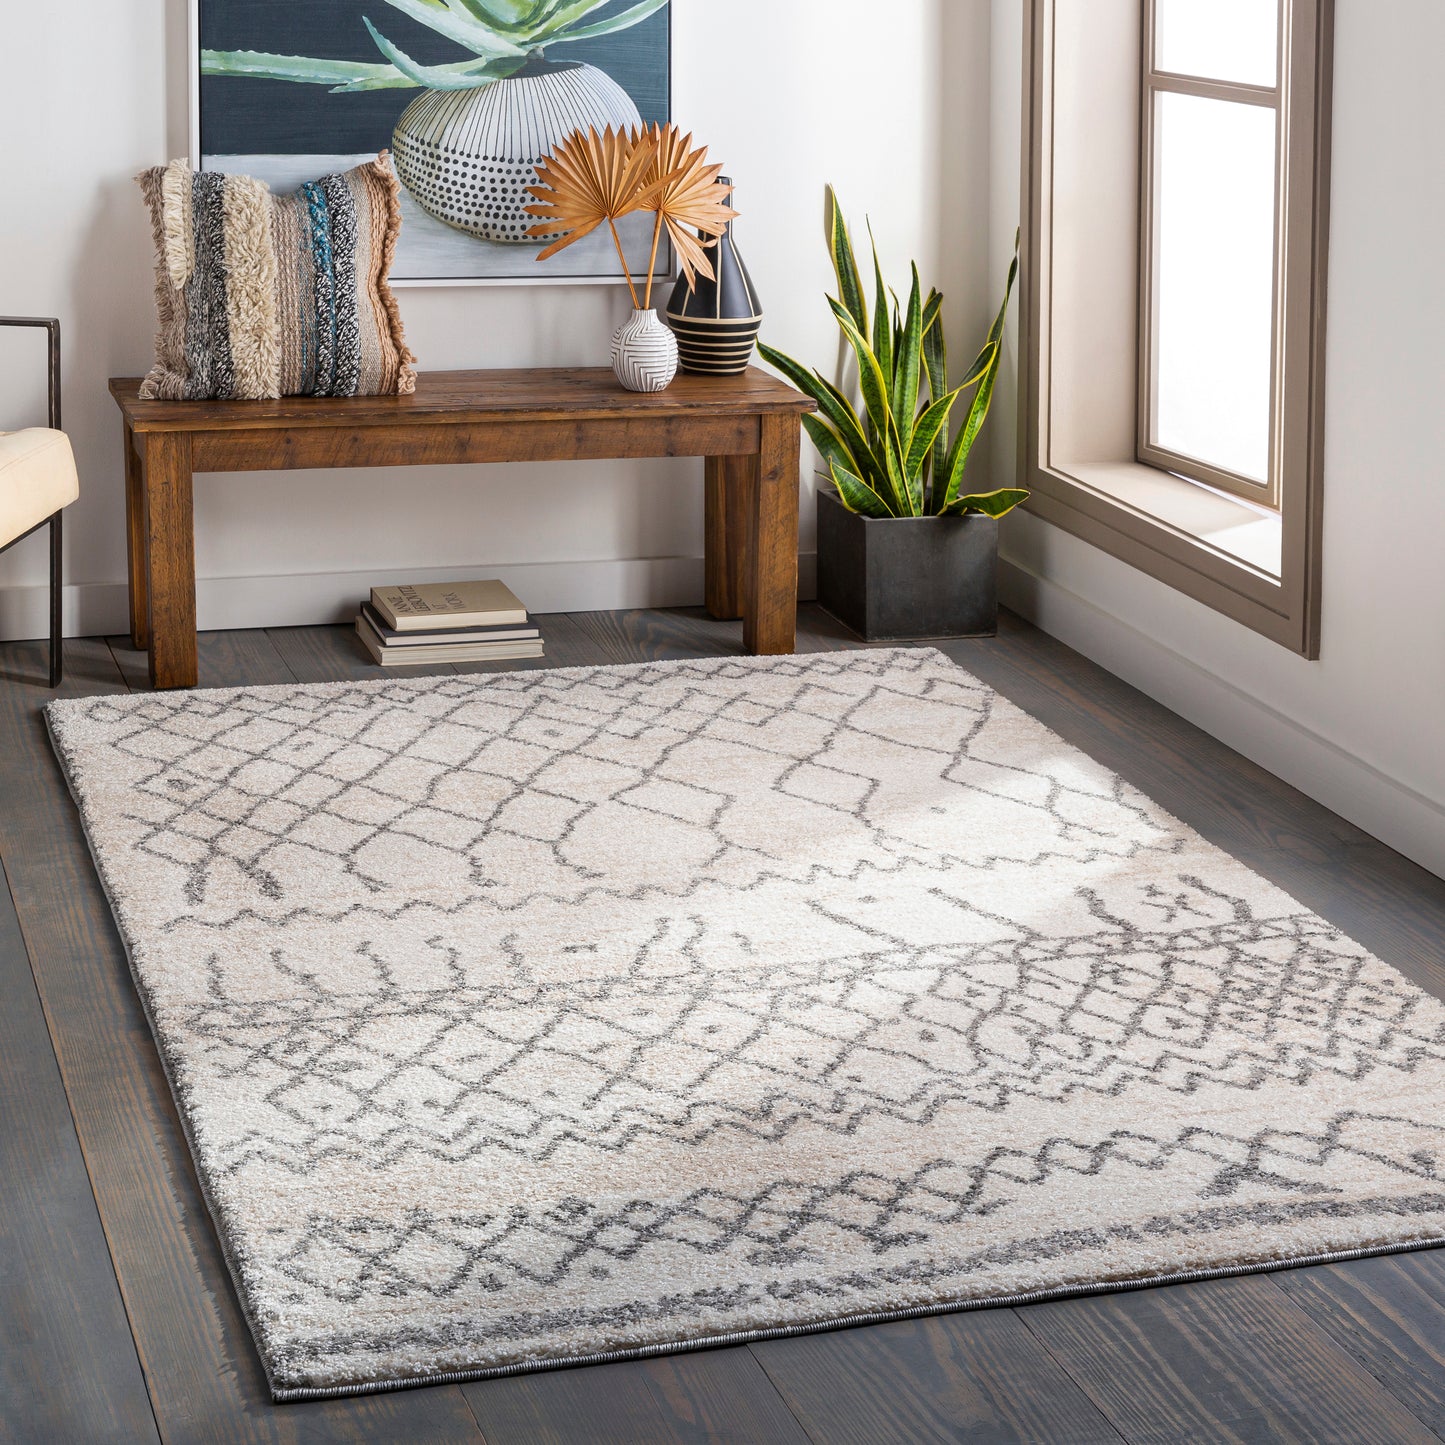 Andorra 26959 Machine Woven Synthetic Blend Indoor Area Rug by Surya Rugs